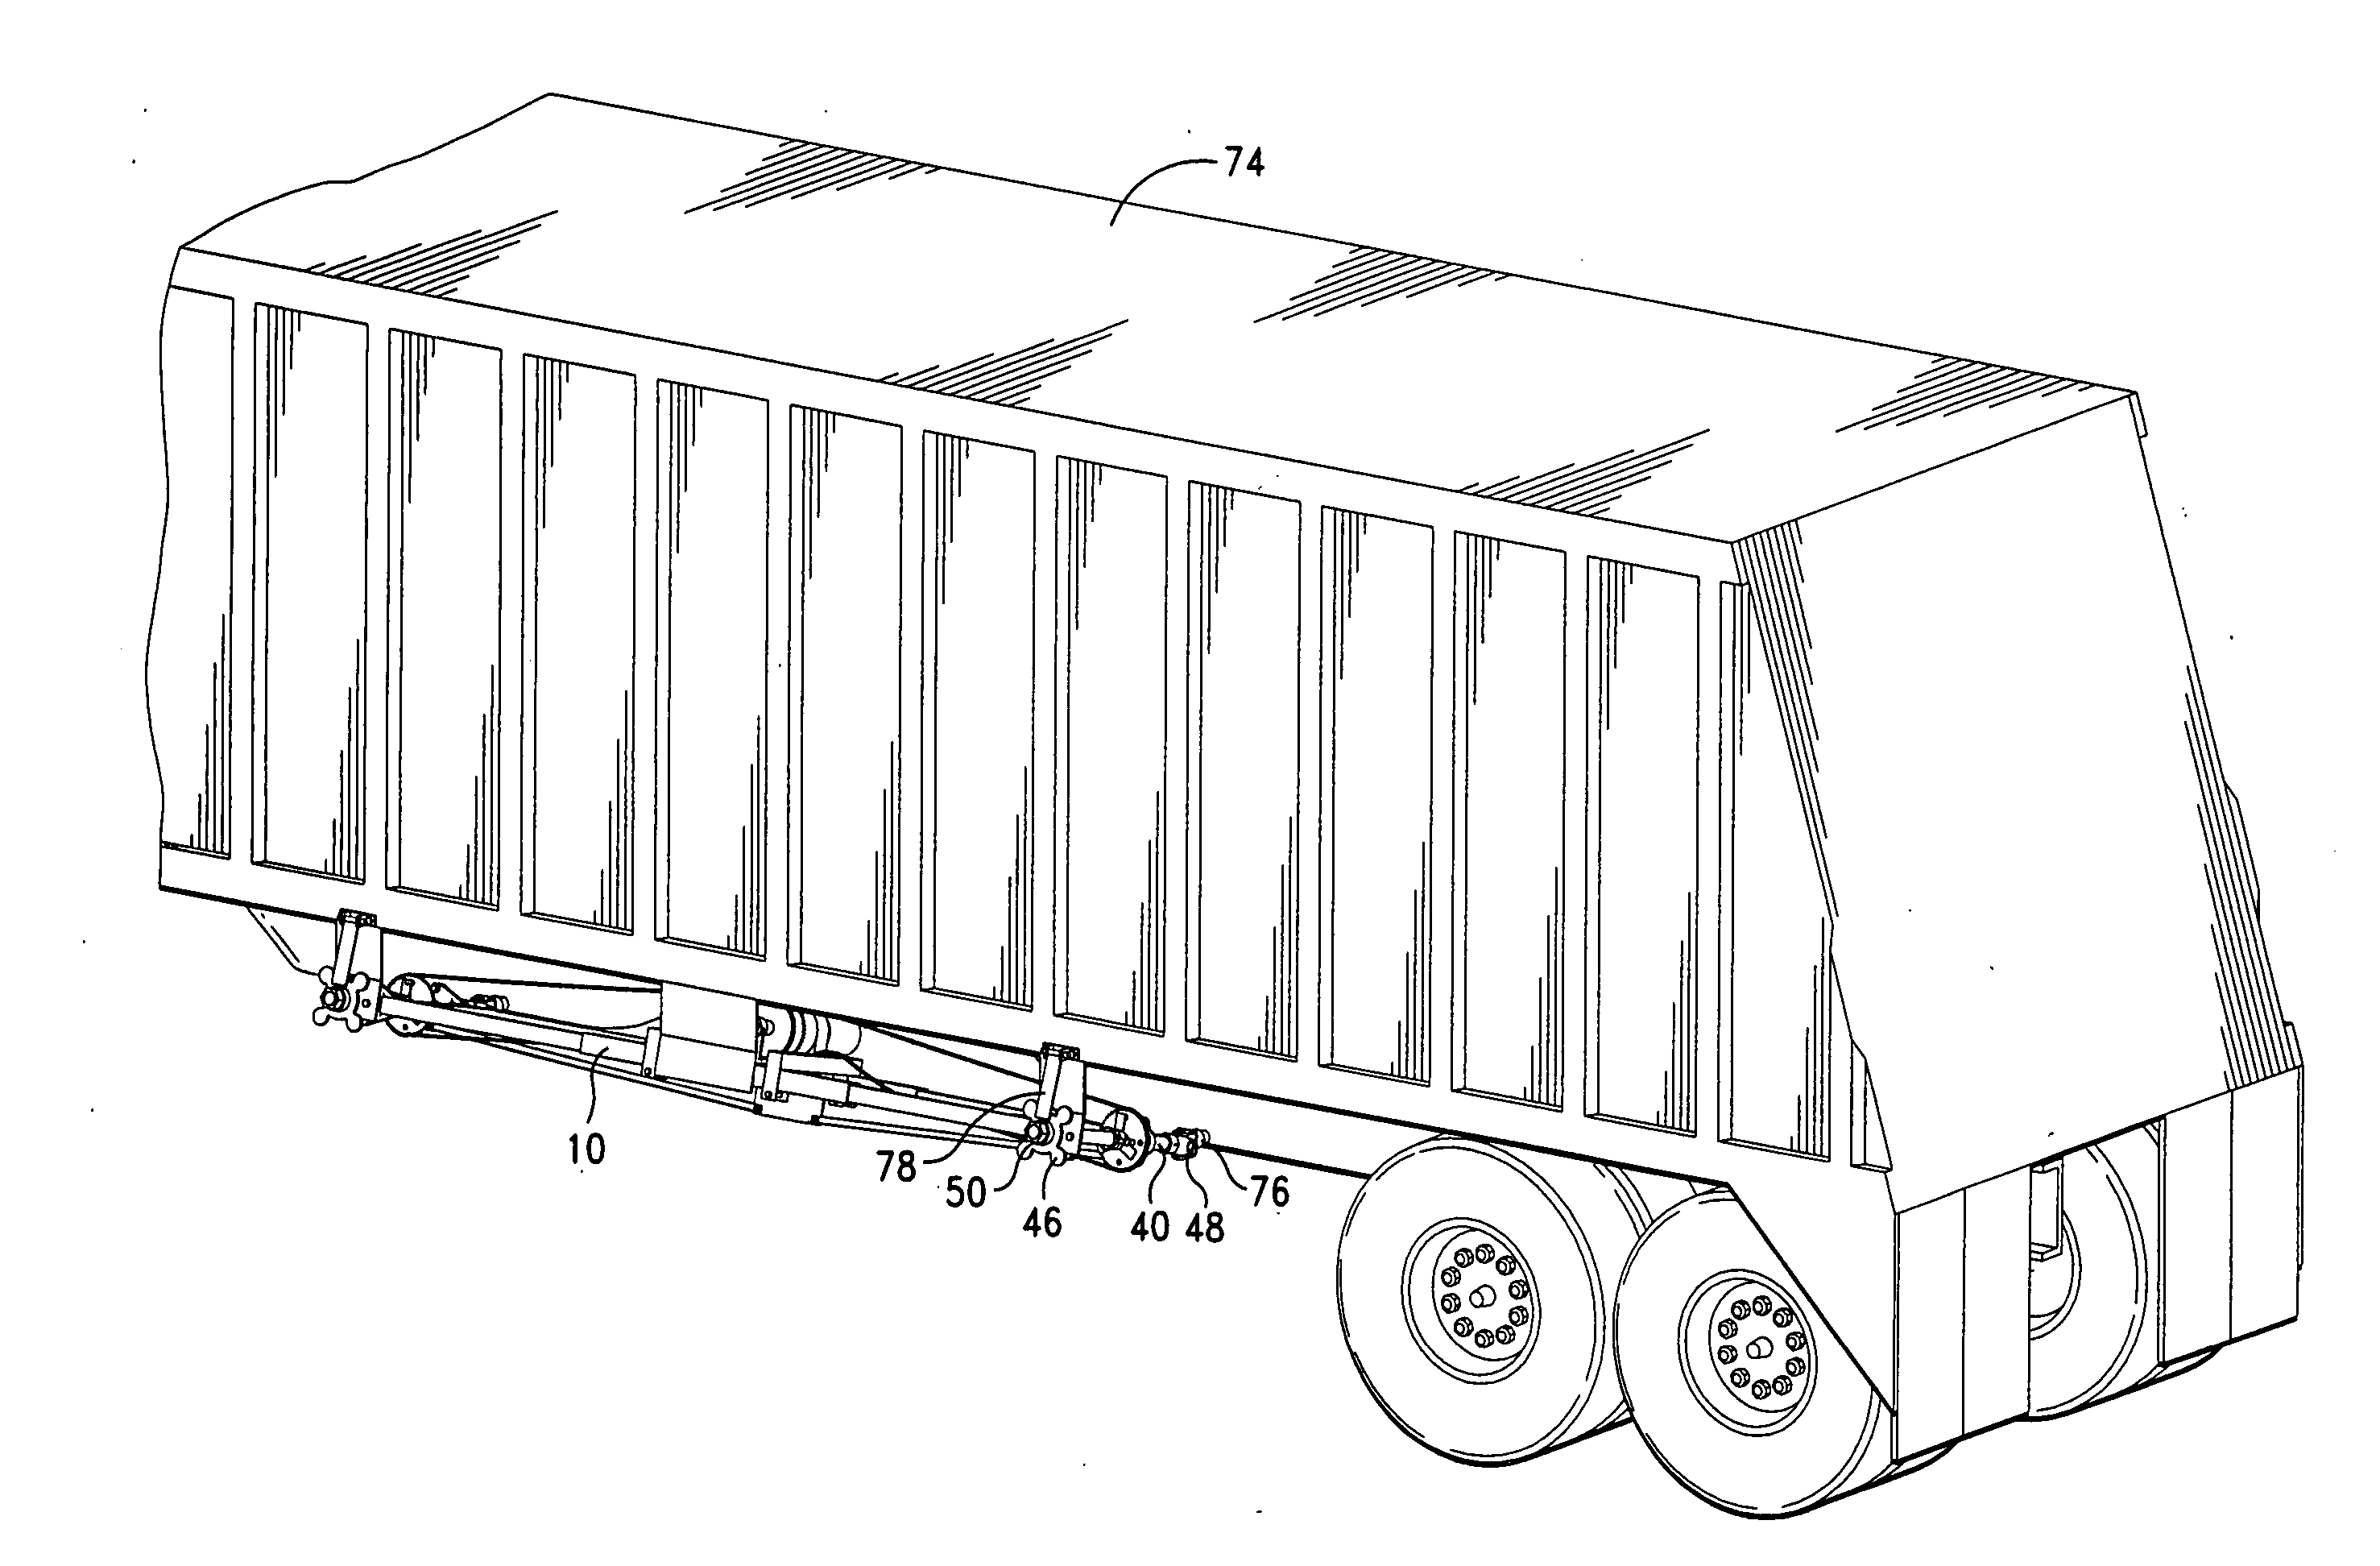 Apparatus for operating commodity trailer hopper trap doors